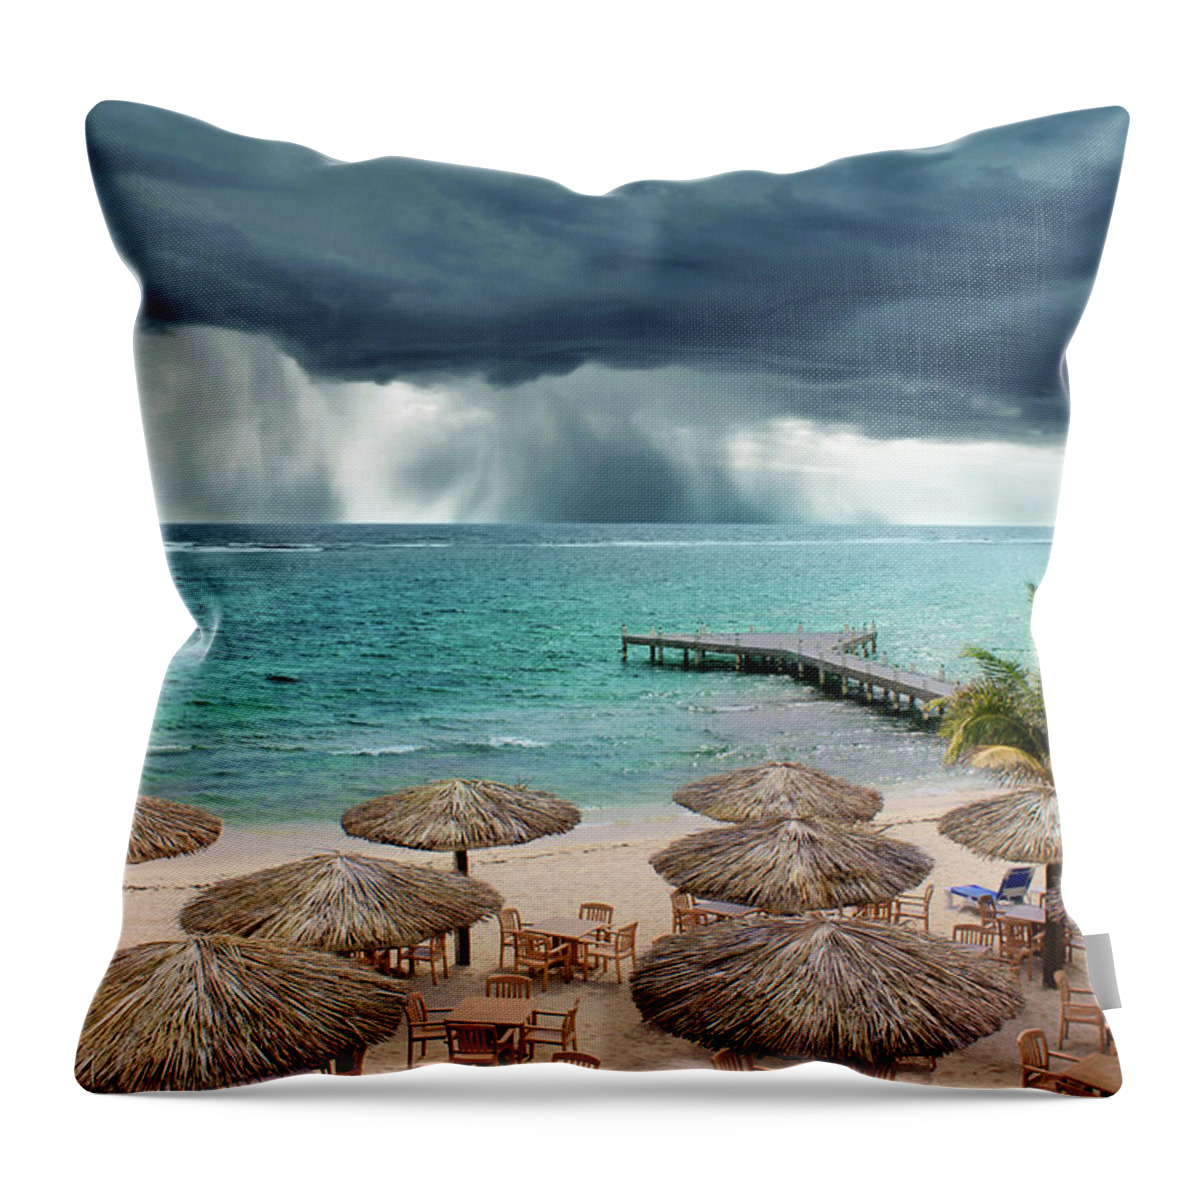 Grand Cayman Throw Pillow featuring the photograph Caribbean Storm by Iryna Goodall